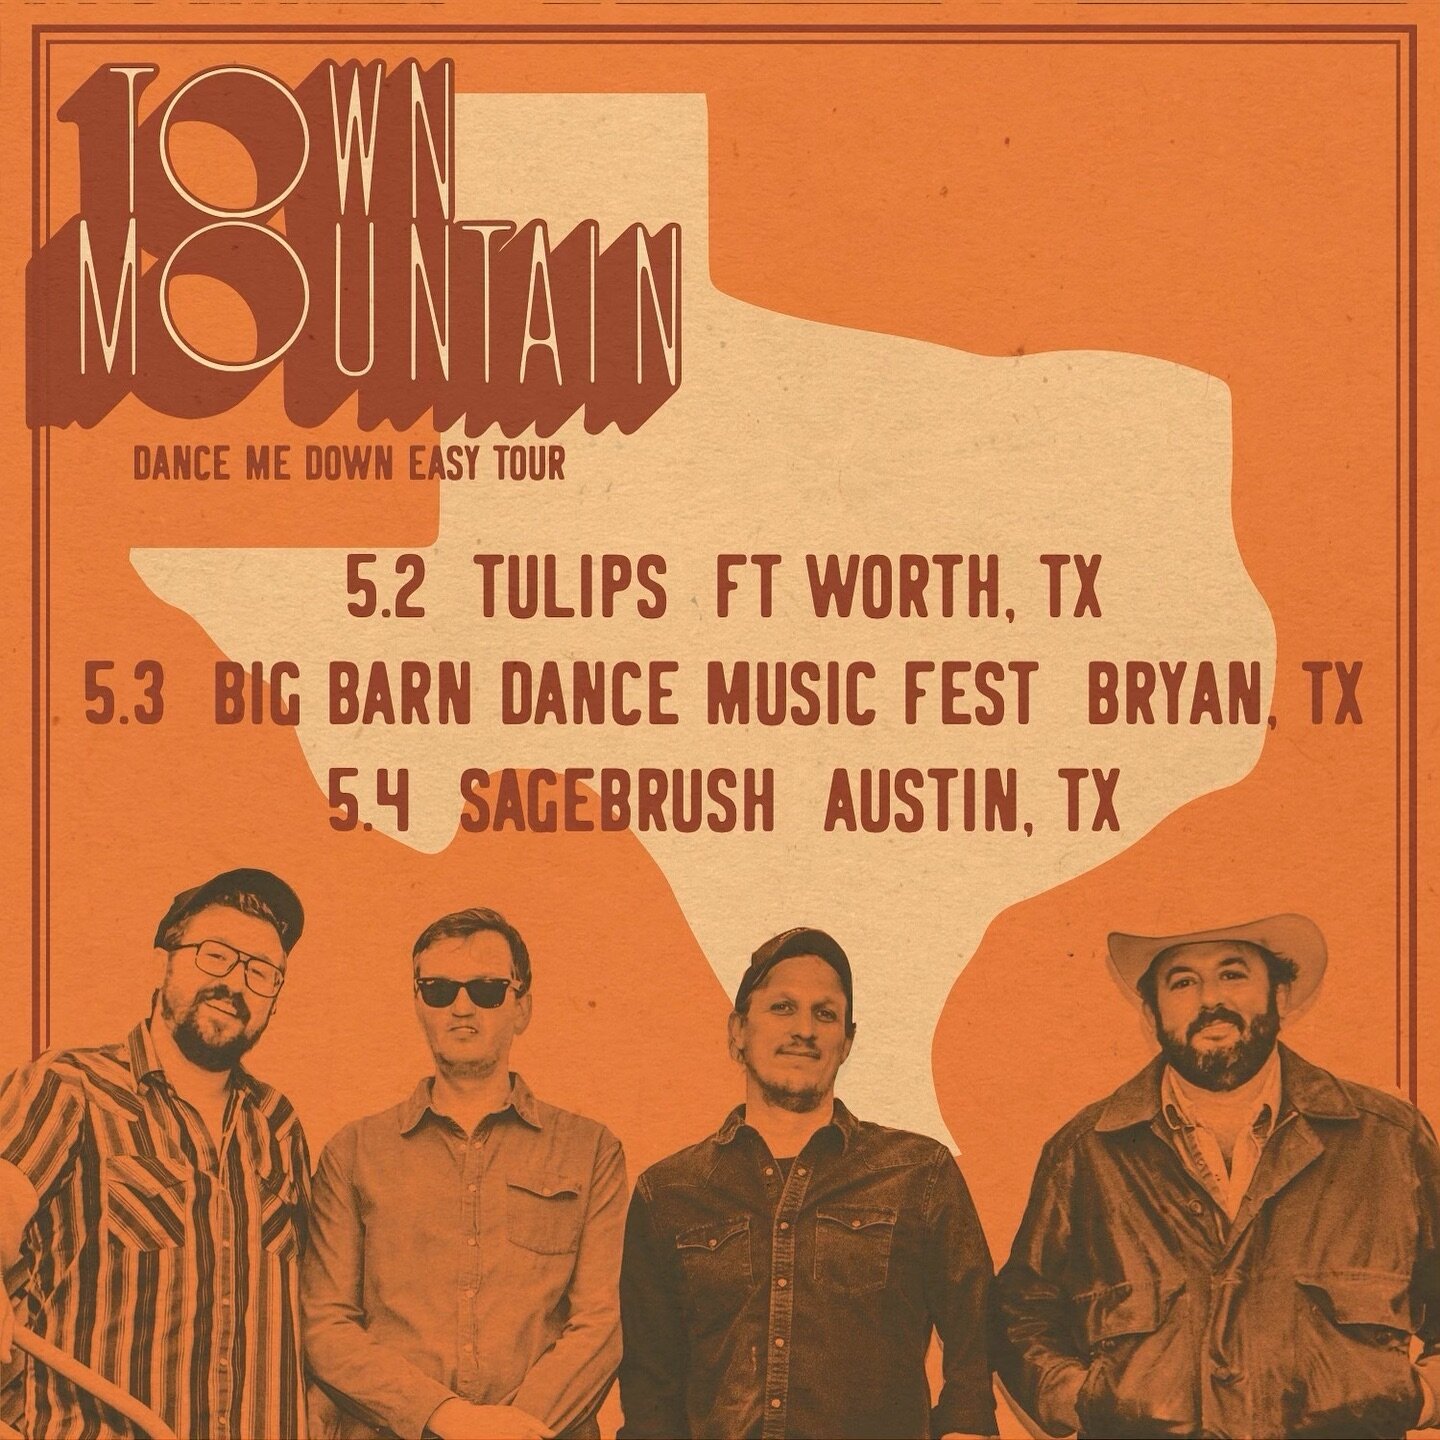 📍TEXAS📍we&rsquo;re comin&rsquo; your way the first week of May and we cannot WAIT to boogie with y&rsquo;all in some of our favorite venues in the great state of TX! 

All tix are on sale NOW (you know where the 🔗 is) so grab yours and come party 